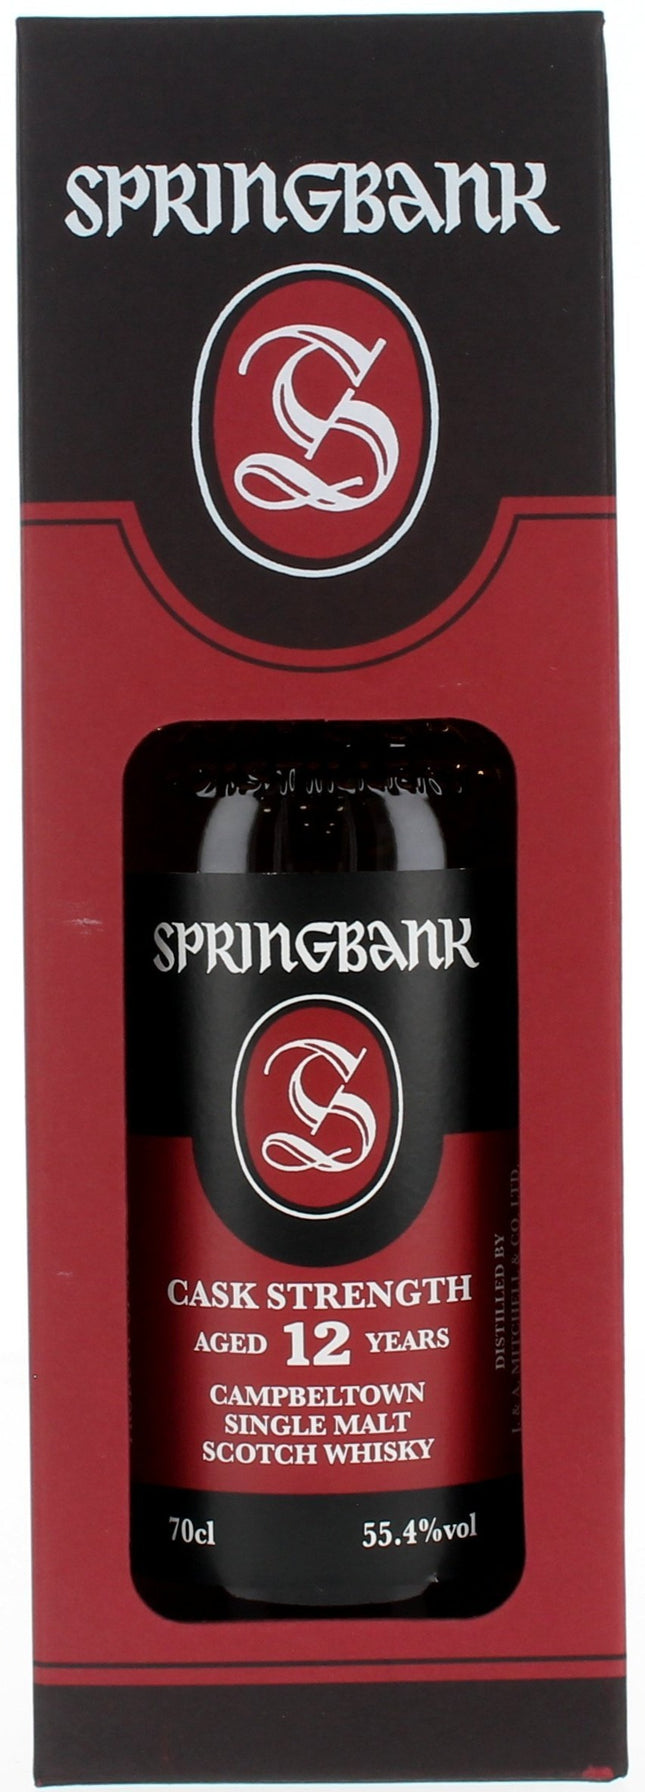 Springbank 12 Year Old Cask Strength - 70cl 55.4%